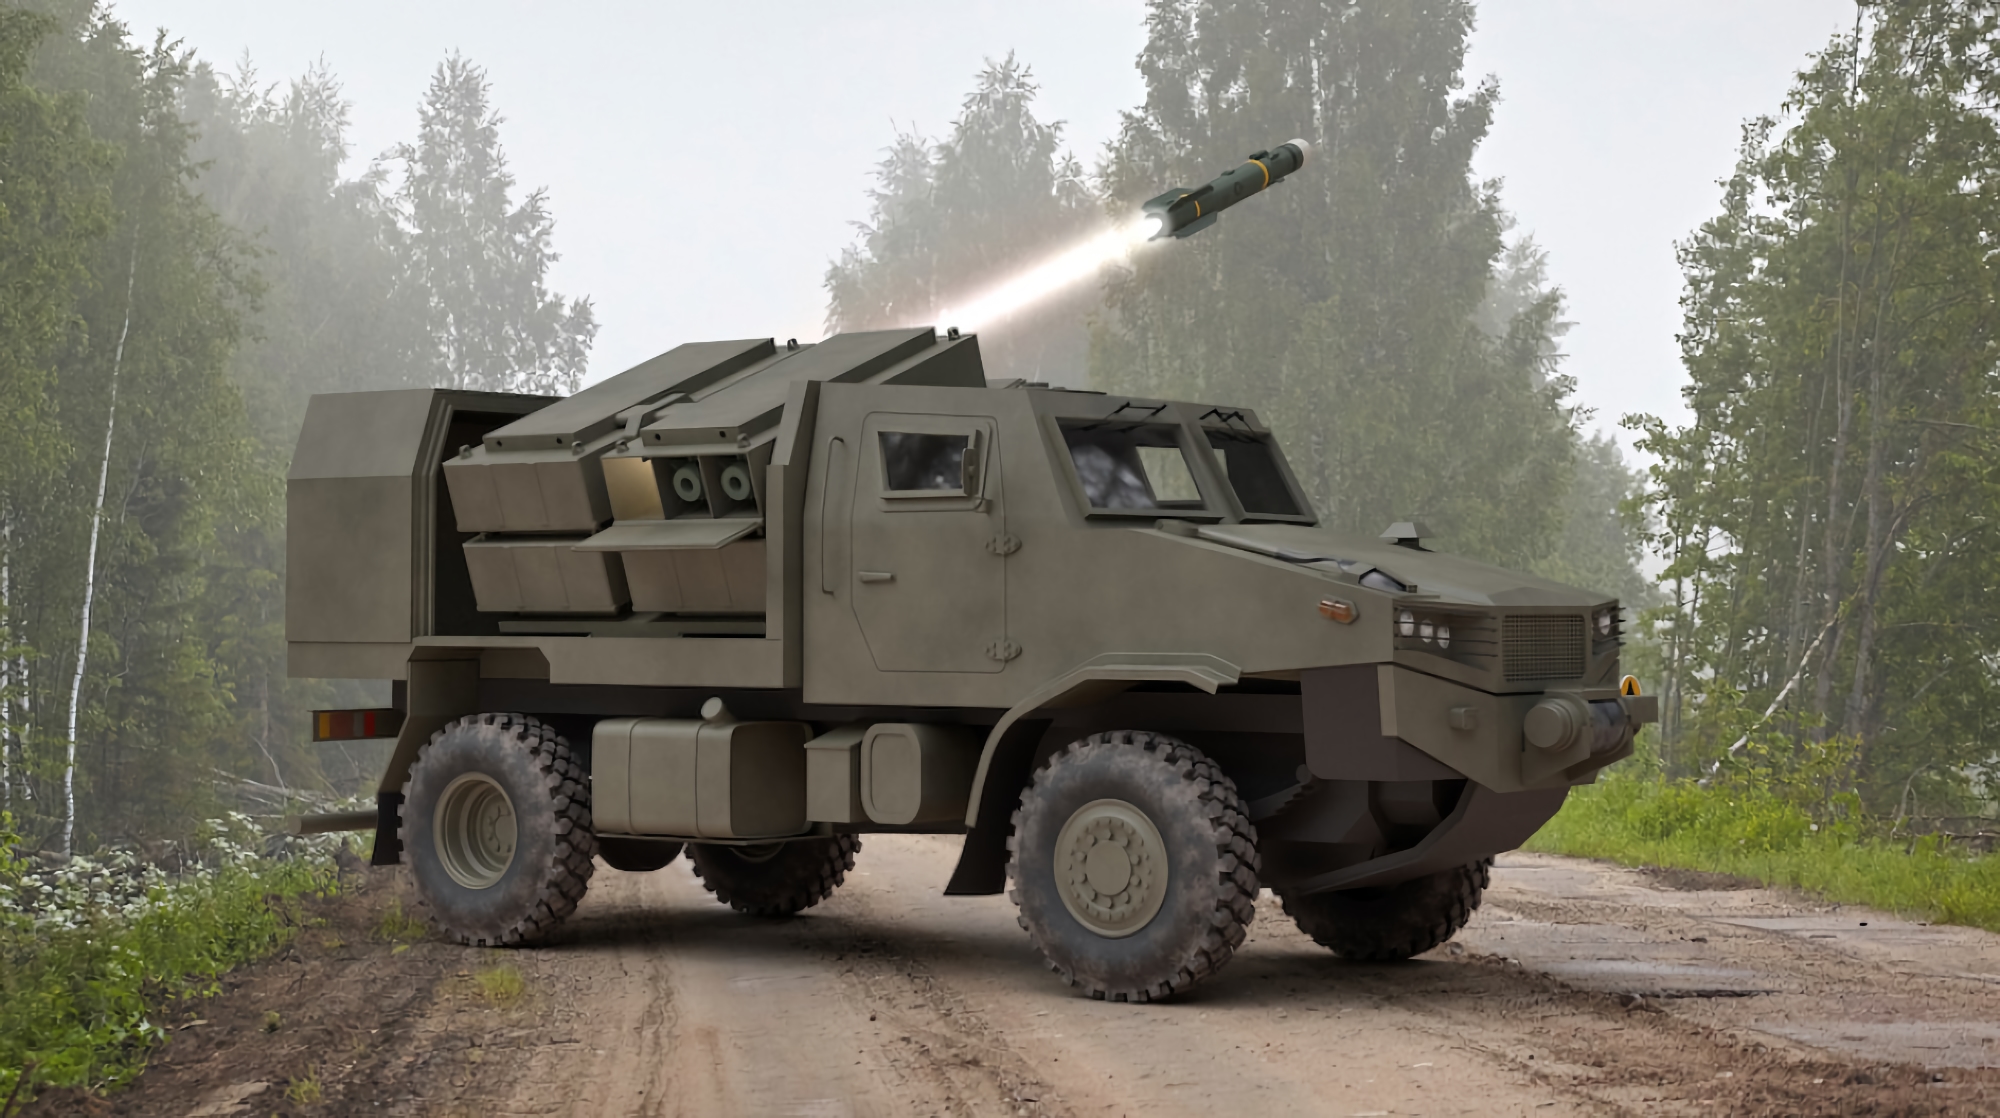 Poland to develop new anti-tank armored vehicle armed with MBDA Brimstone missiles